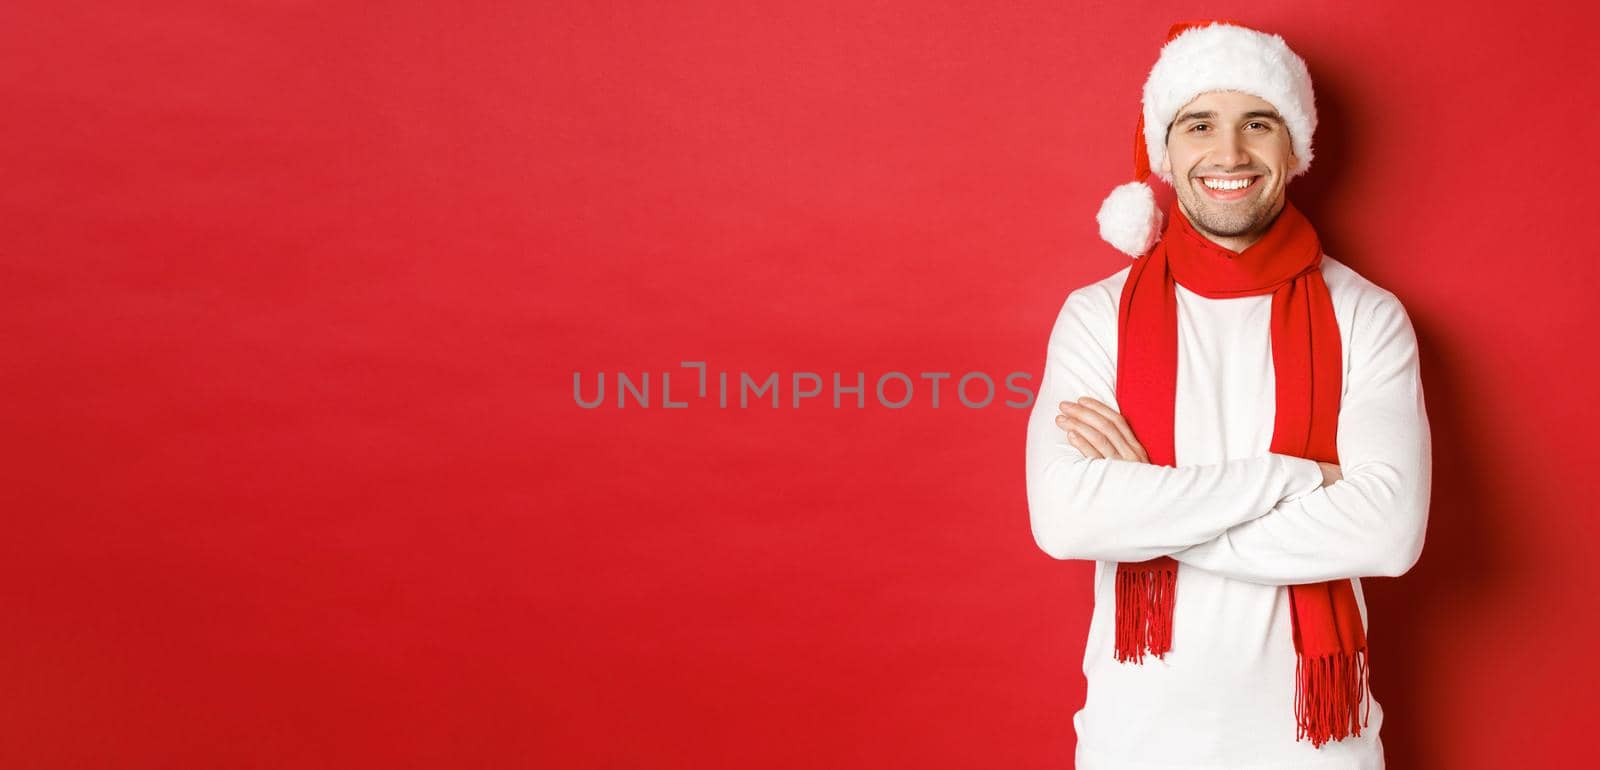 Handsome caucasian guy with bristle, wearing santa hat, scarf and white sweater, cross arms on chest and smiling happy, standing against red background.